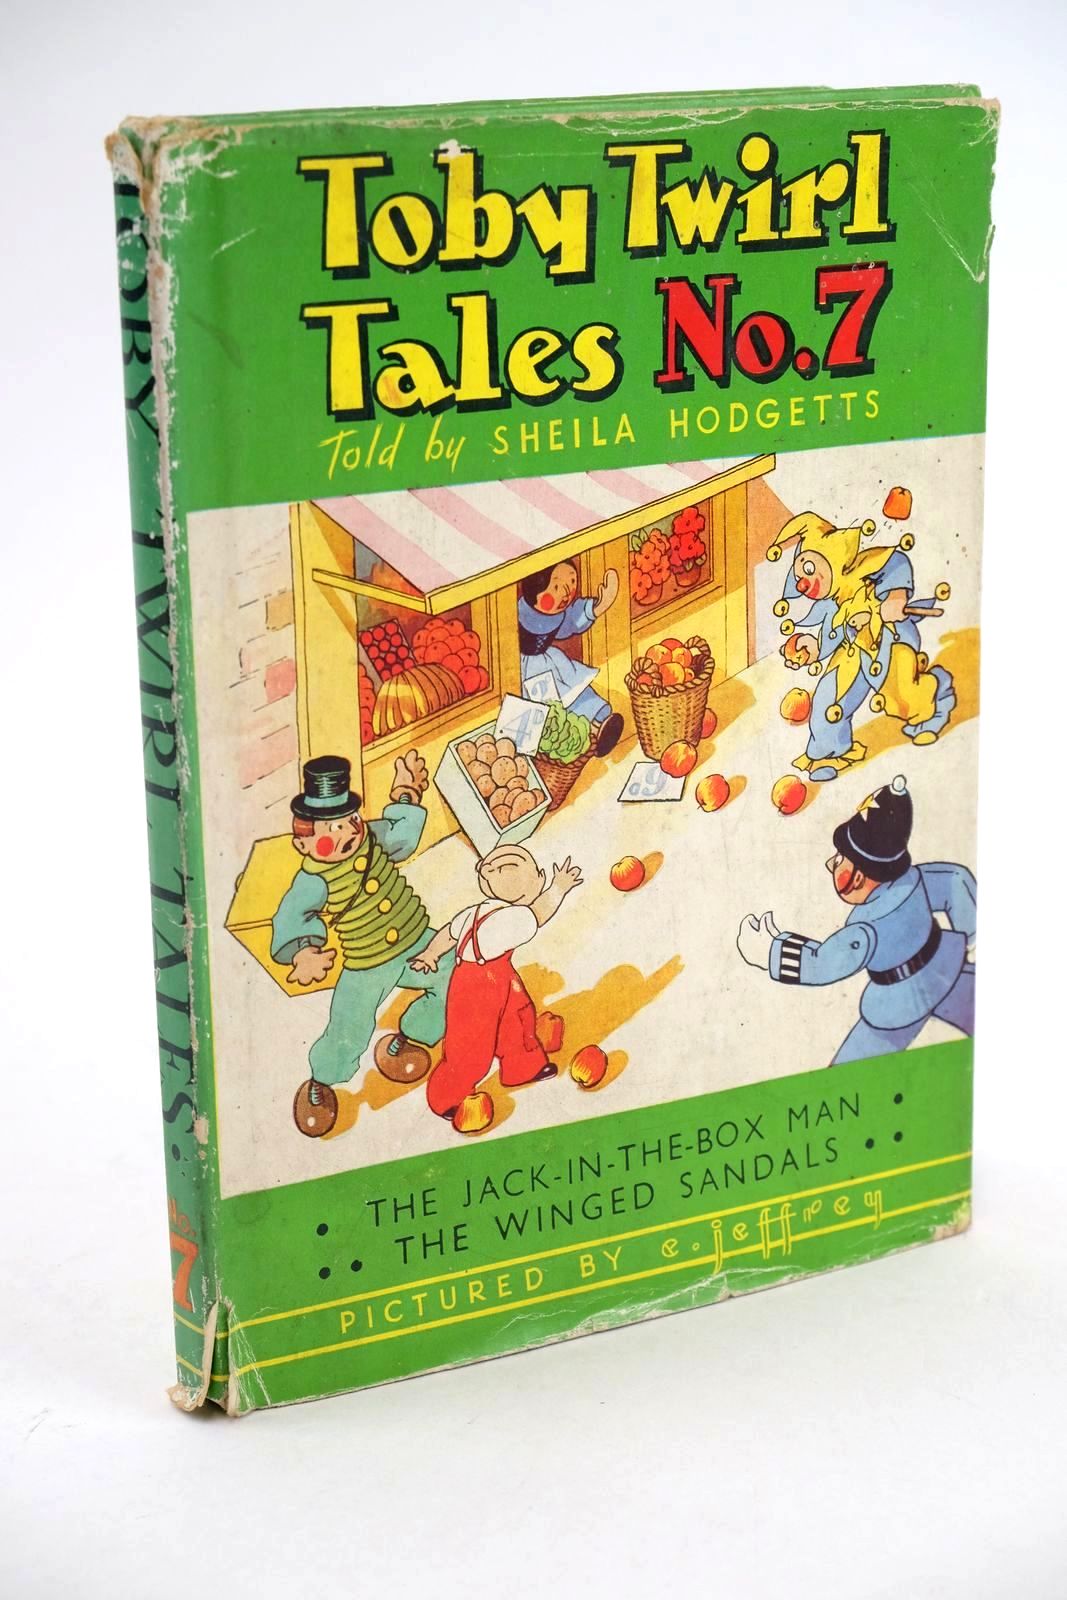 Photo of TOBY TWIRL TALES No. 7 written by Hodgetts, Sheila illustrated by Jeffrey, E. published by Sampson Low, Marston & Co. Ltd. (STOCK CODE: 1324068)  for sale by Stella & Rose's Books